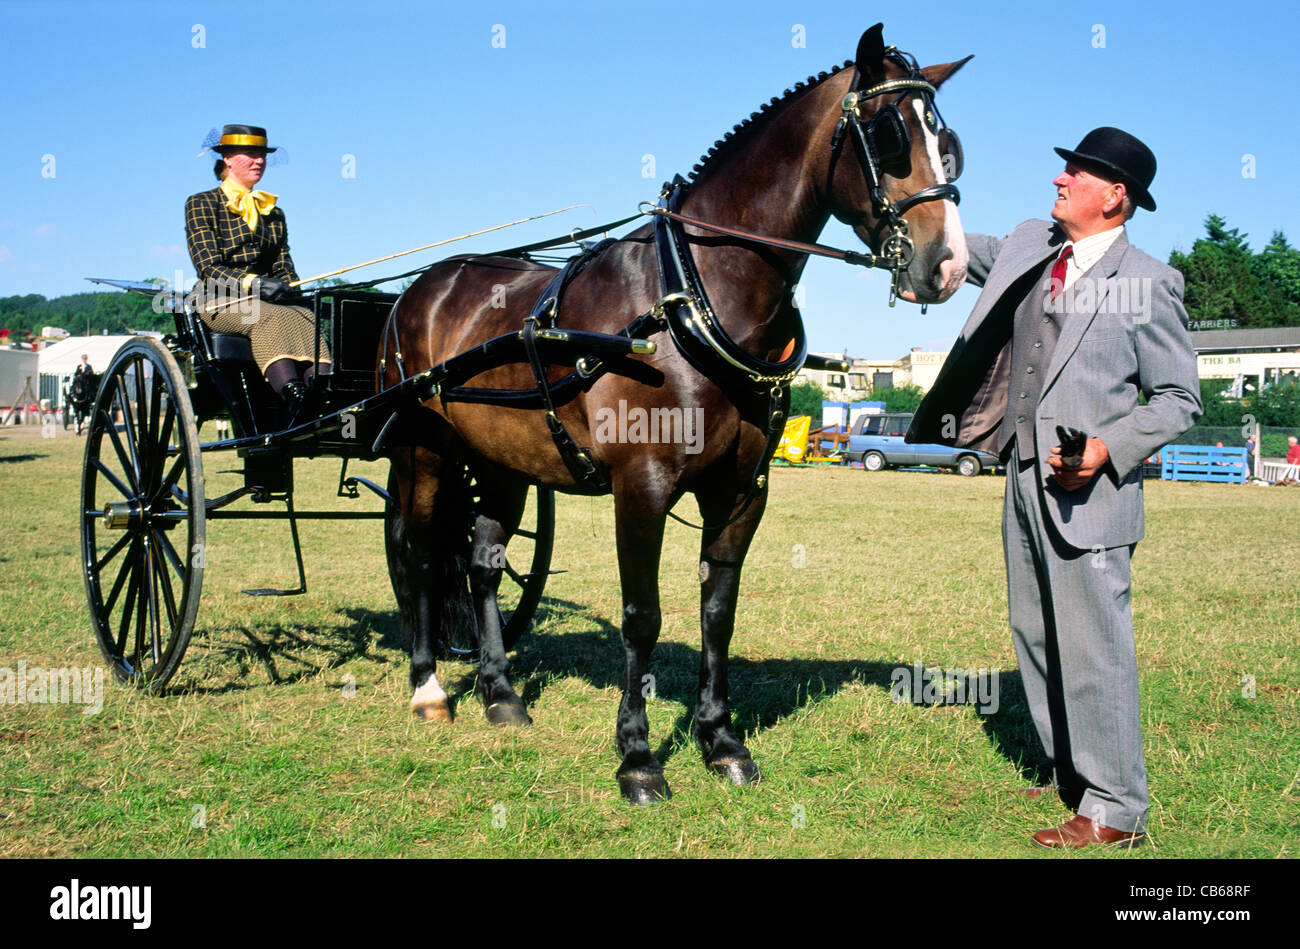 Royal Welsh Show at Builth Wells, Wales, UK. Horse and trap carriage preparing to enter the show ring. Annual agricultural show Stock Photo